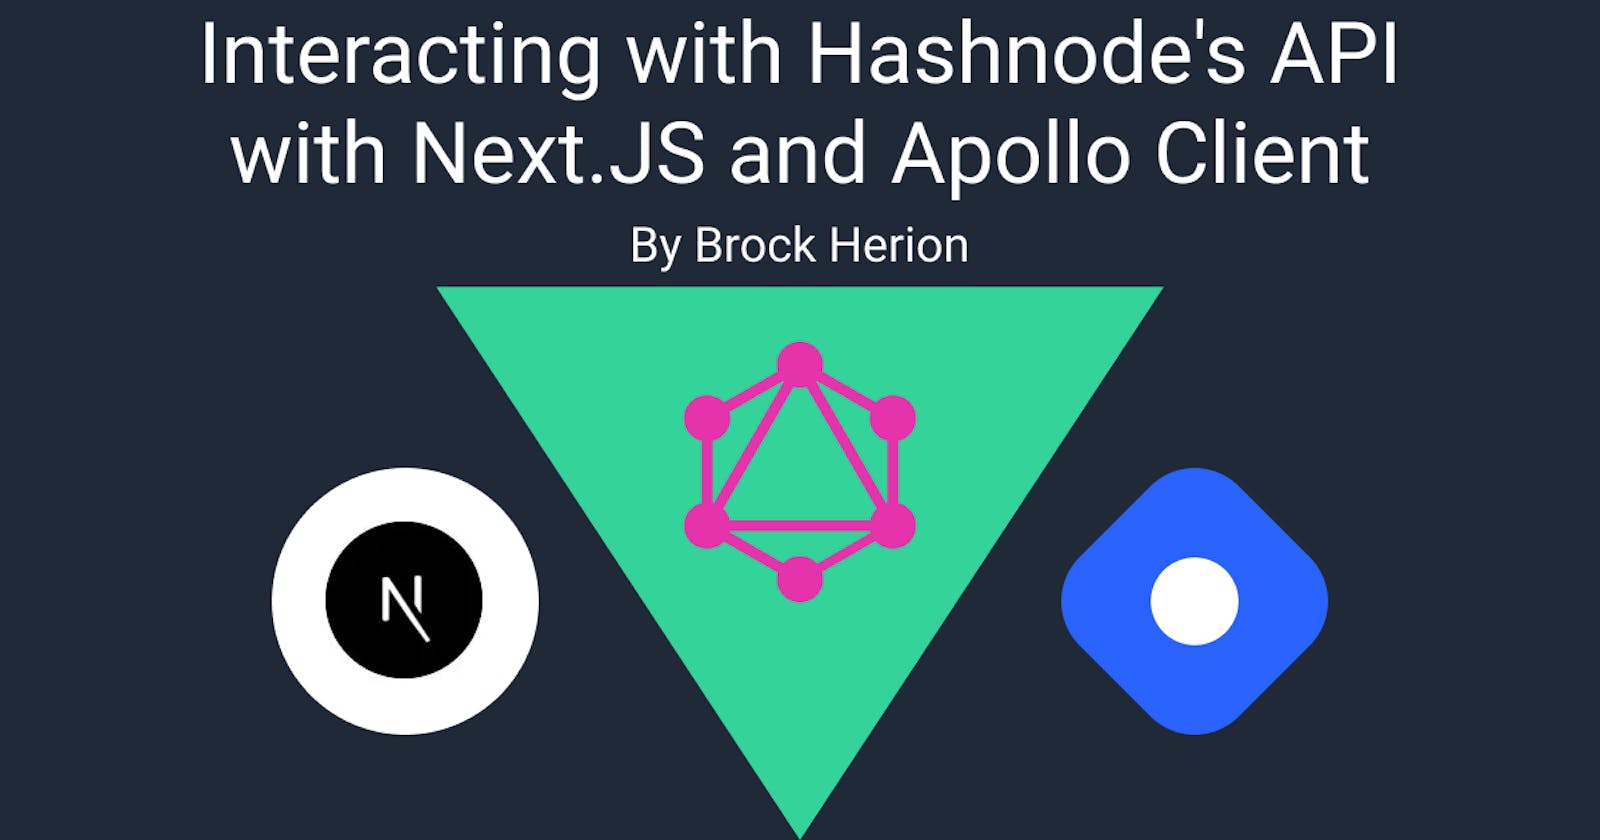 Interacting with Hashnode's API with Next.JS and Apollo Client